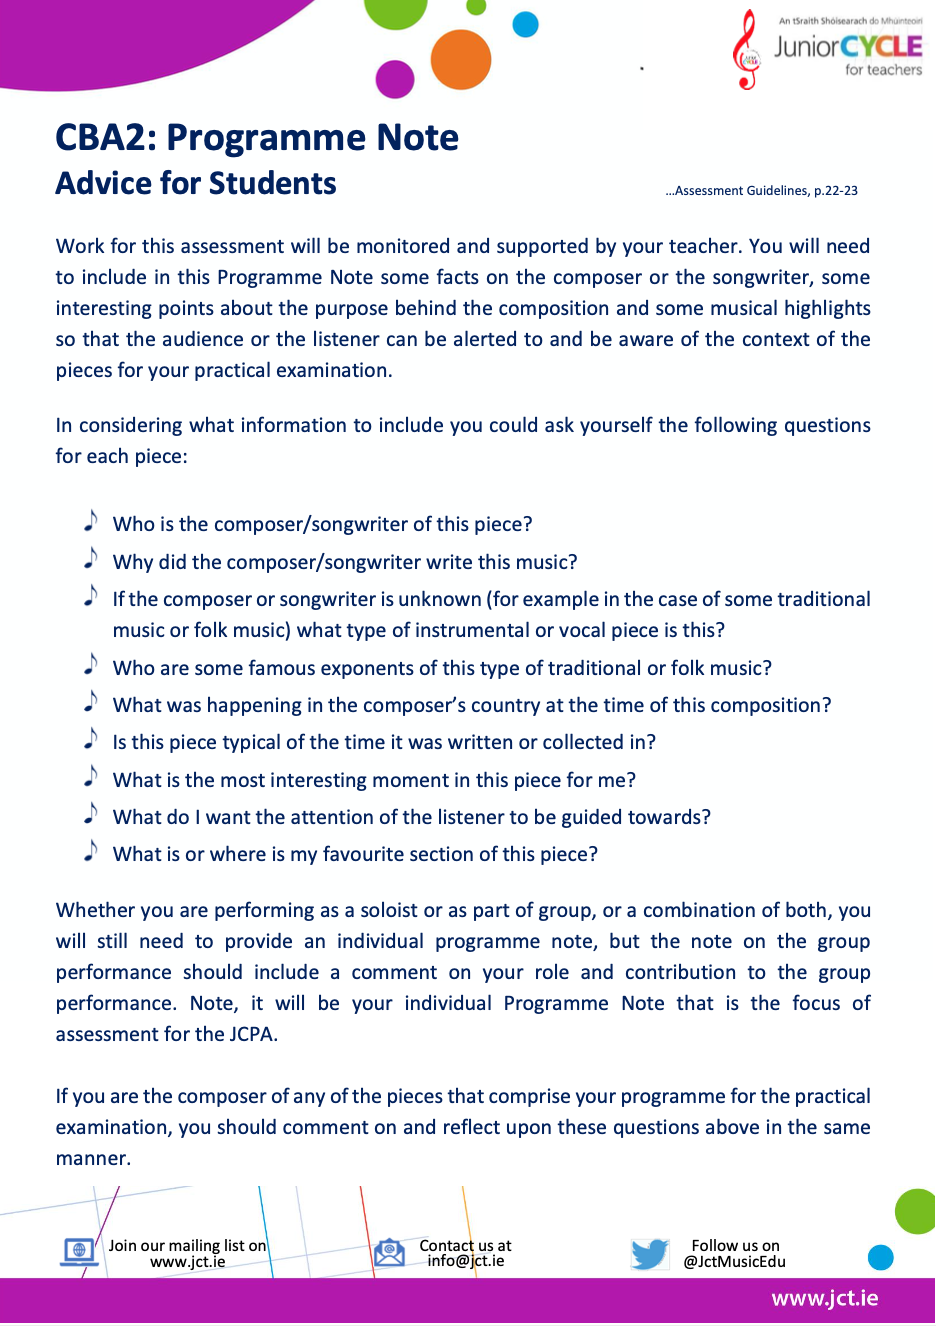 CBA2: Programme Note - Advice for Students